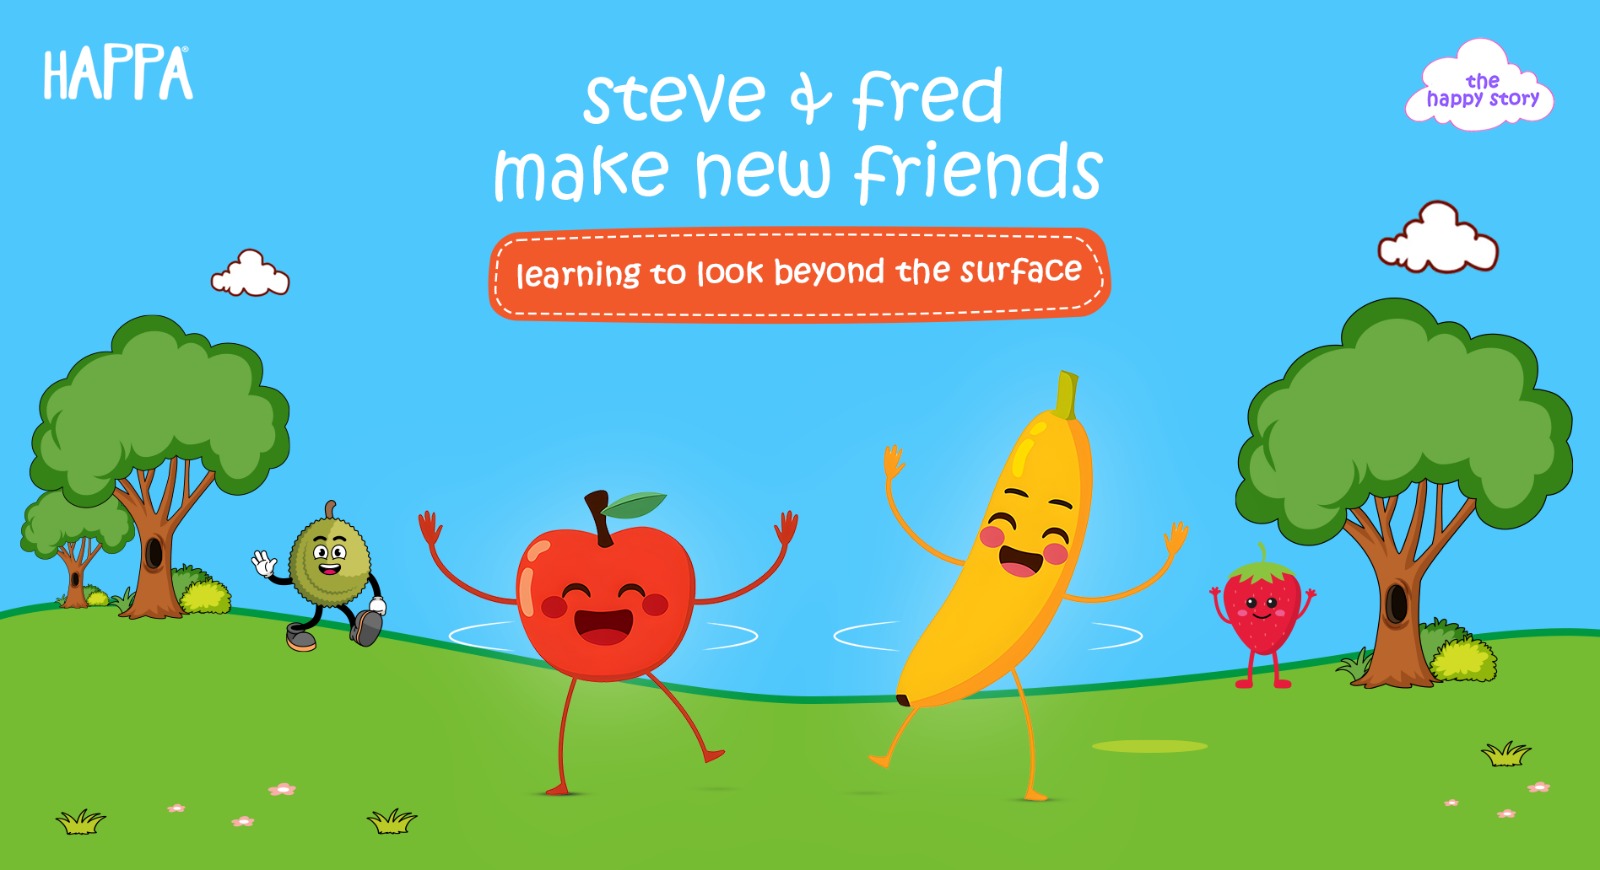 Steve & Fred make new friends- Learning to look beyond the surface